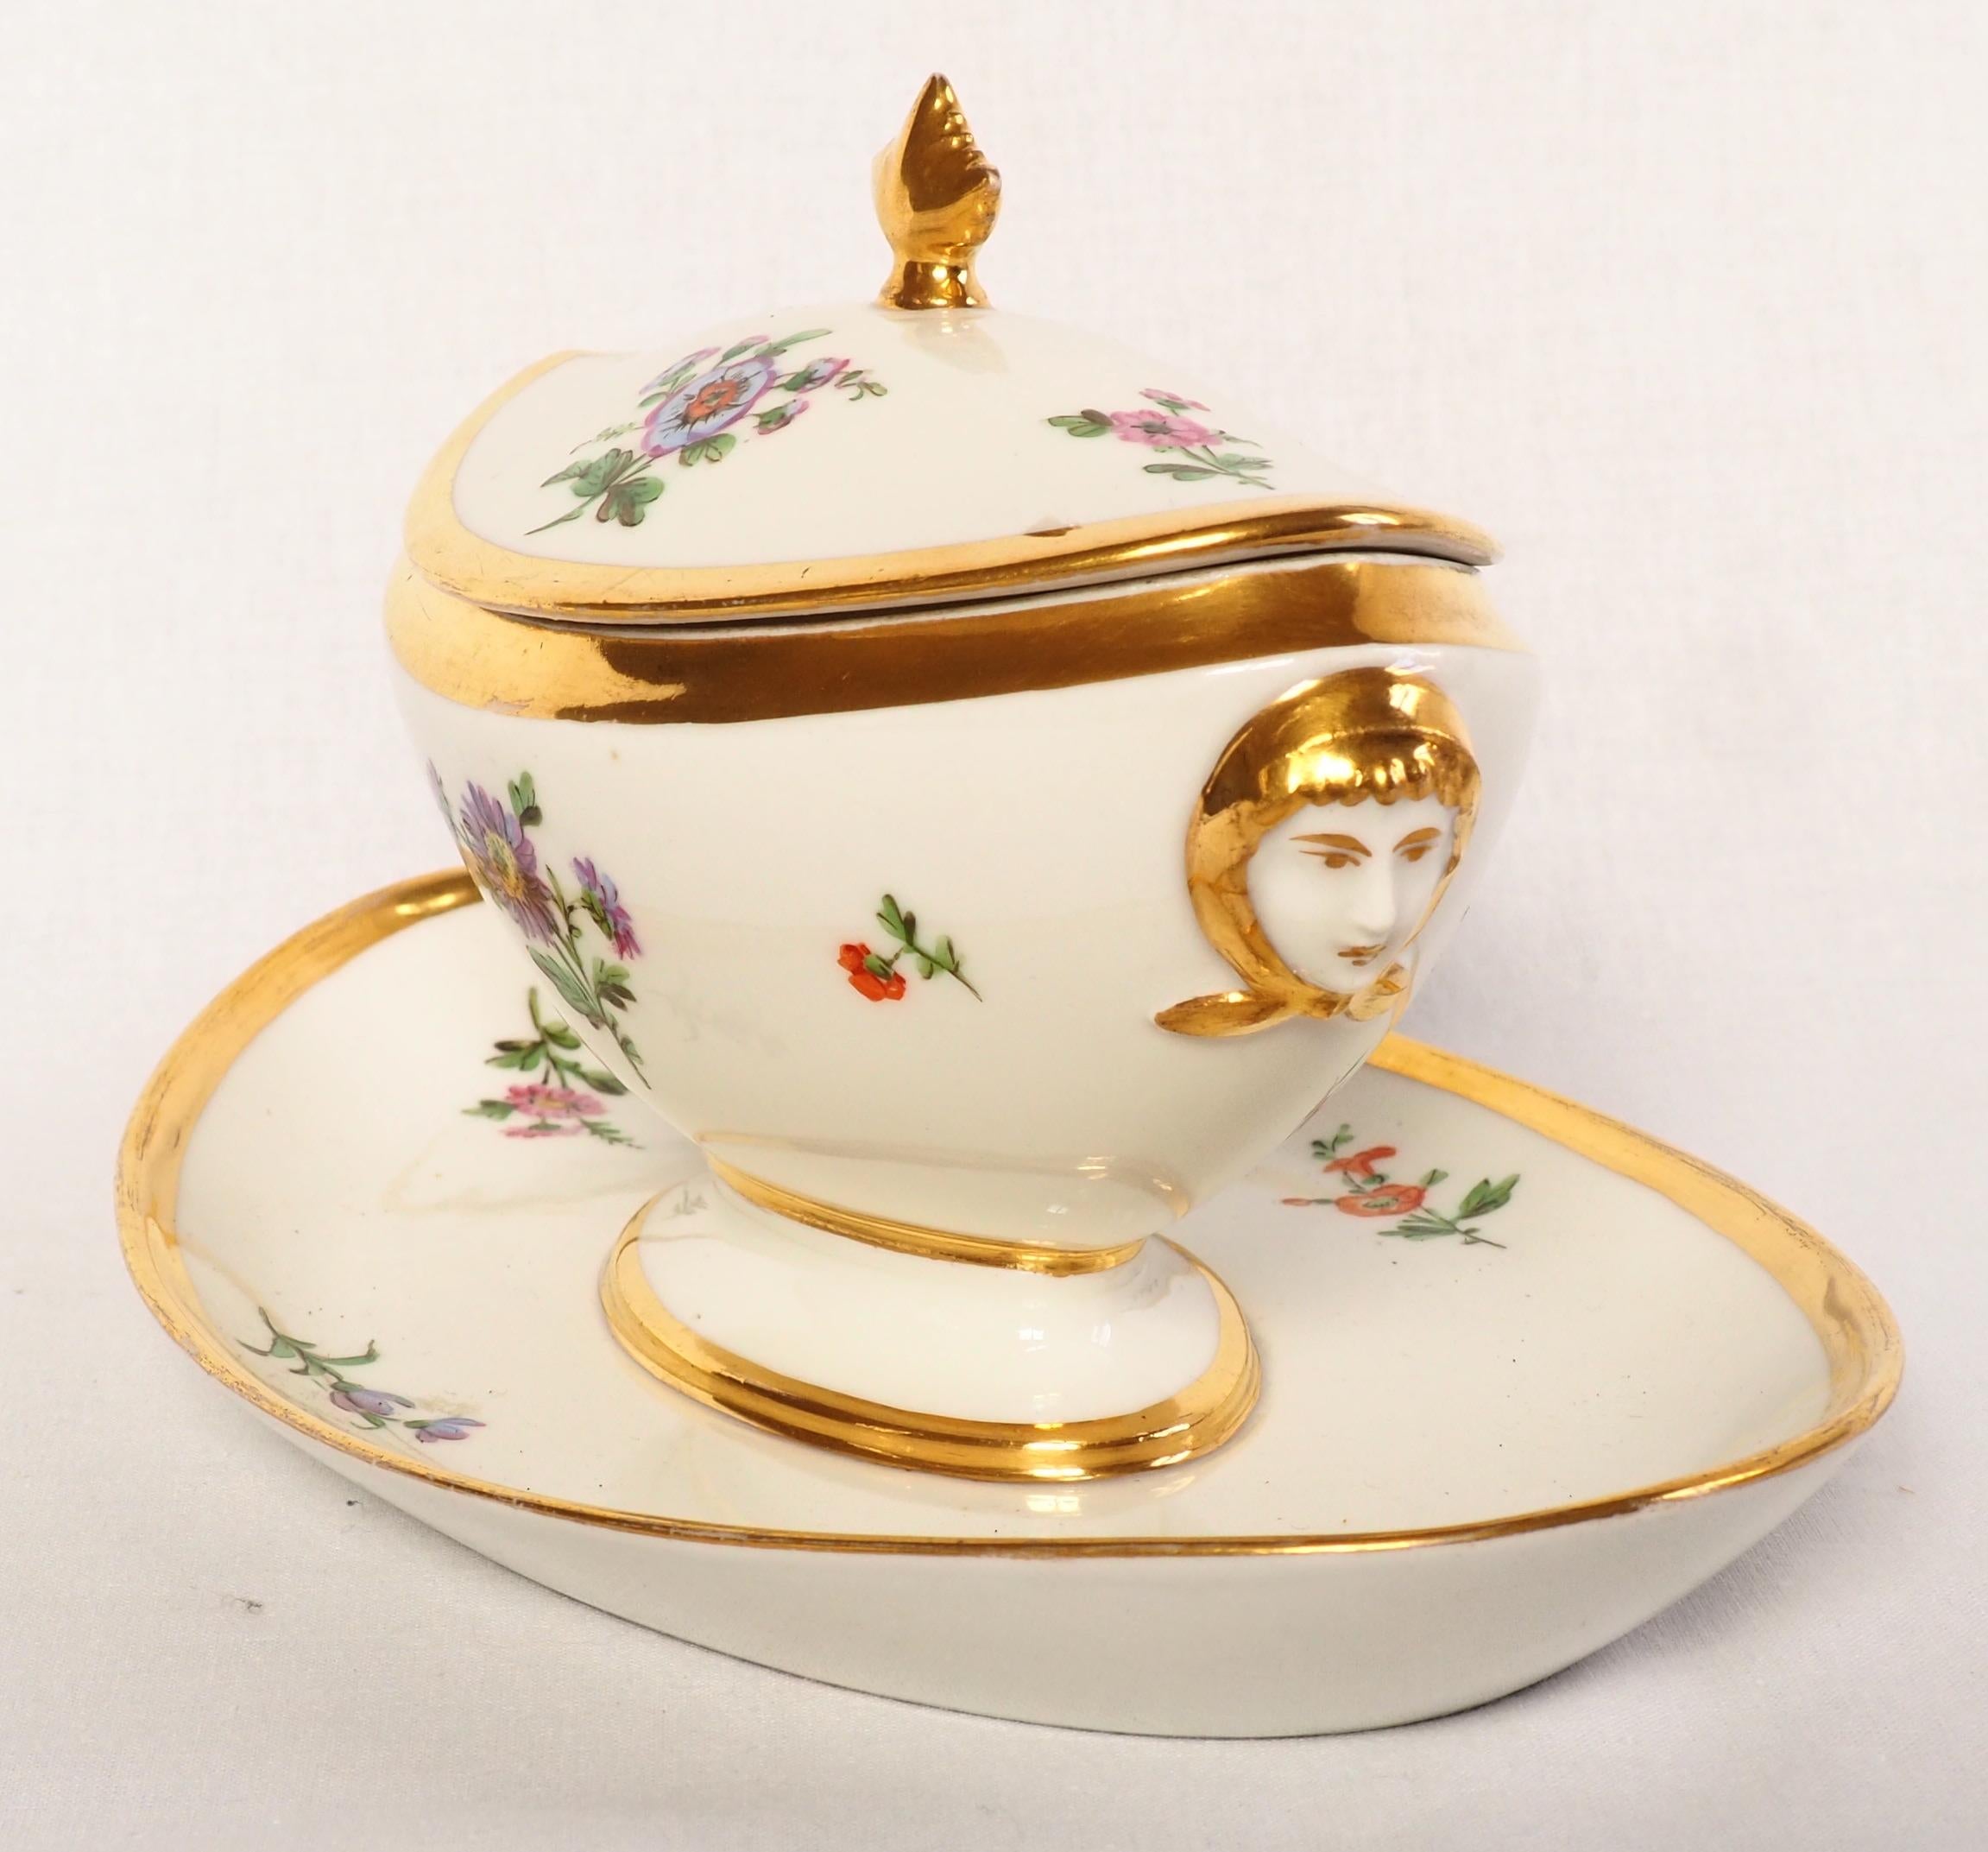 Schoelcher Manufacture : Empire Paris porcelain sauce boat 19th century - signed In Good Condition For Sale In GRENOBLE, FR